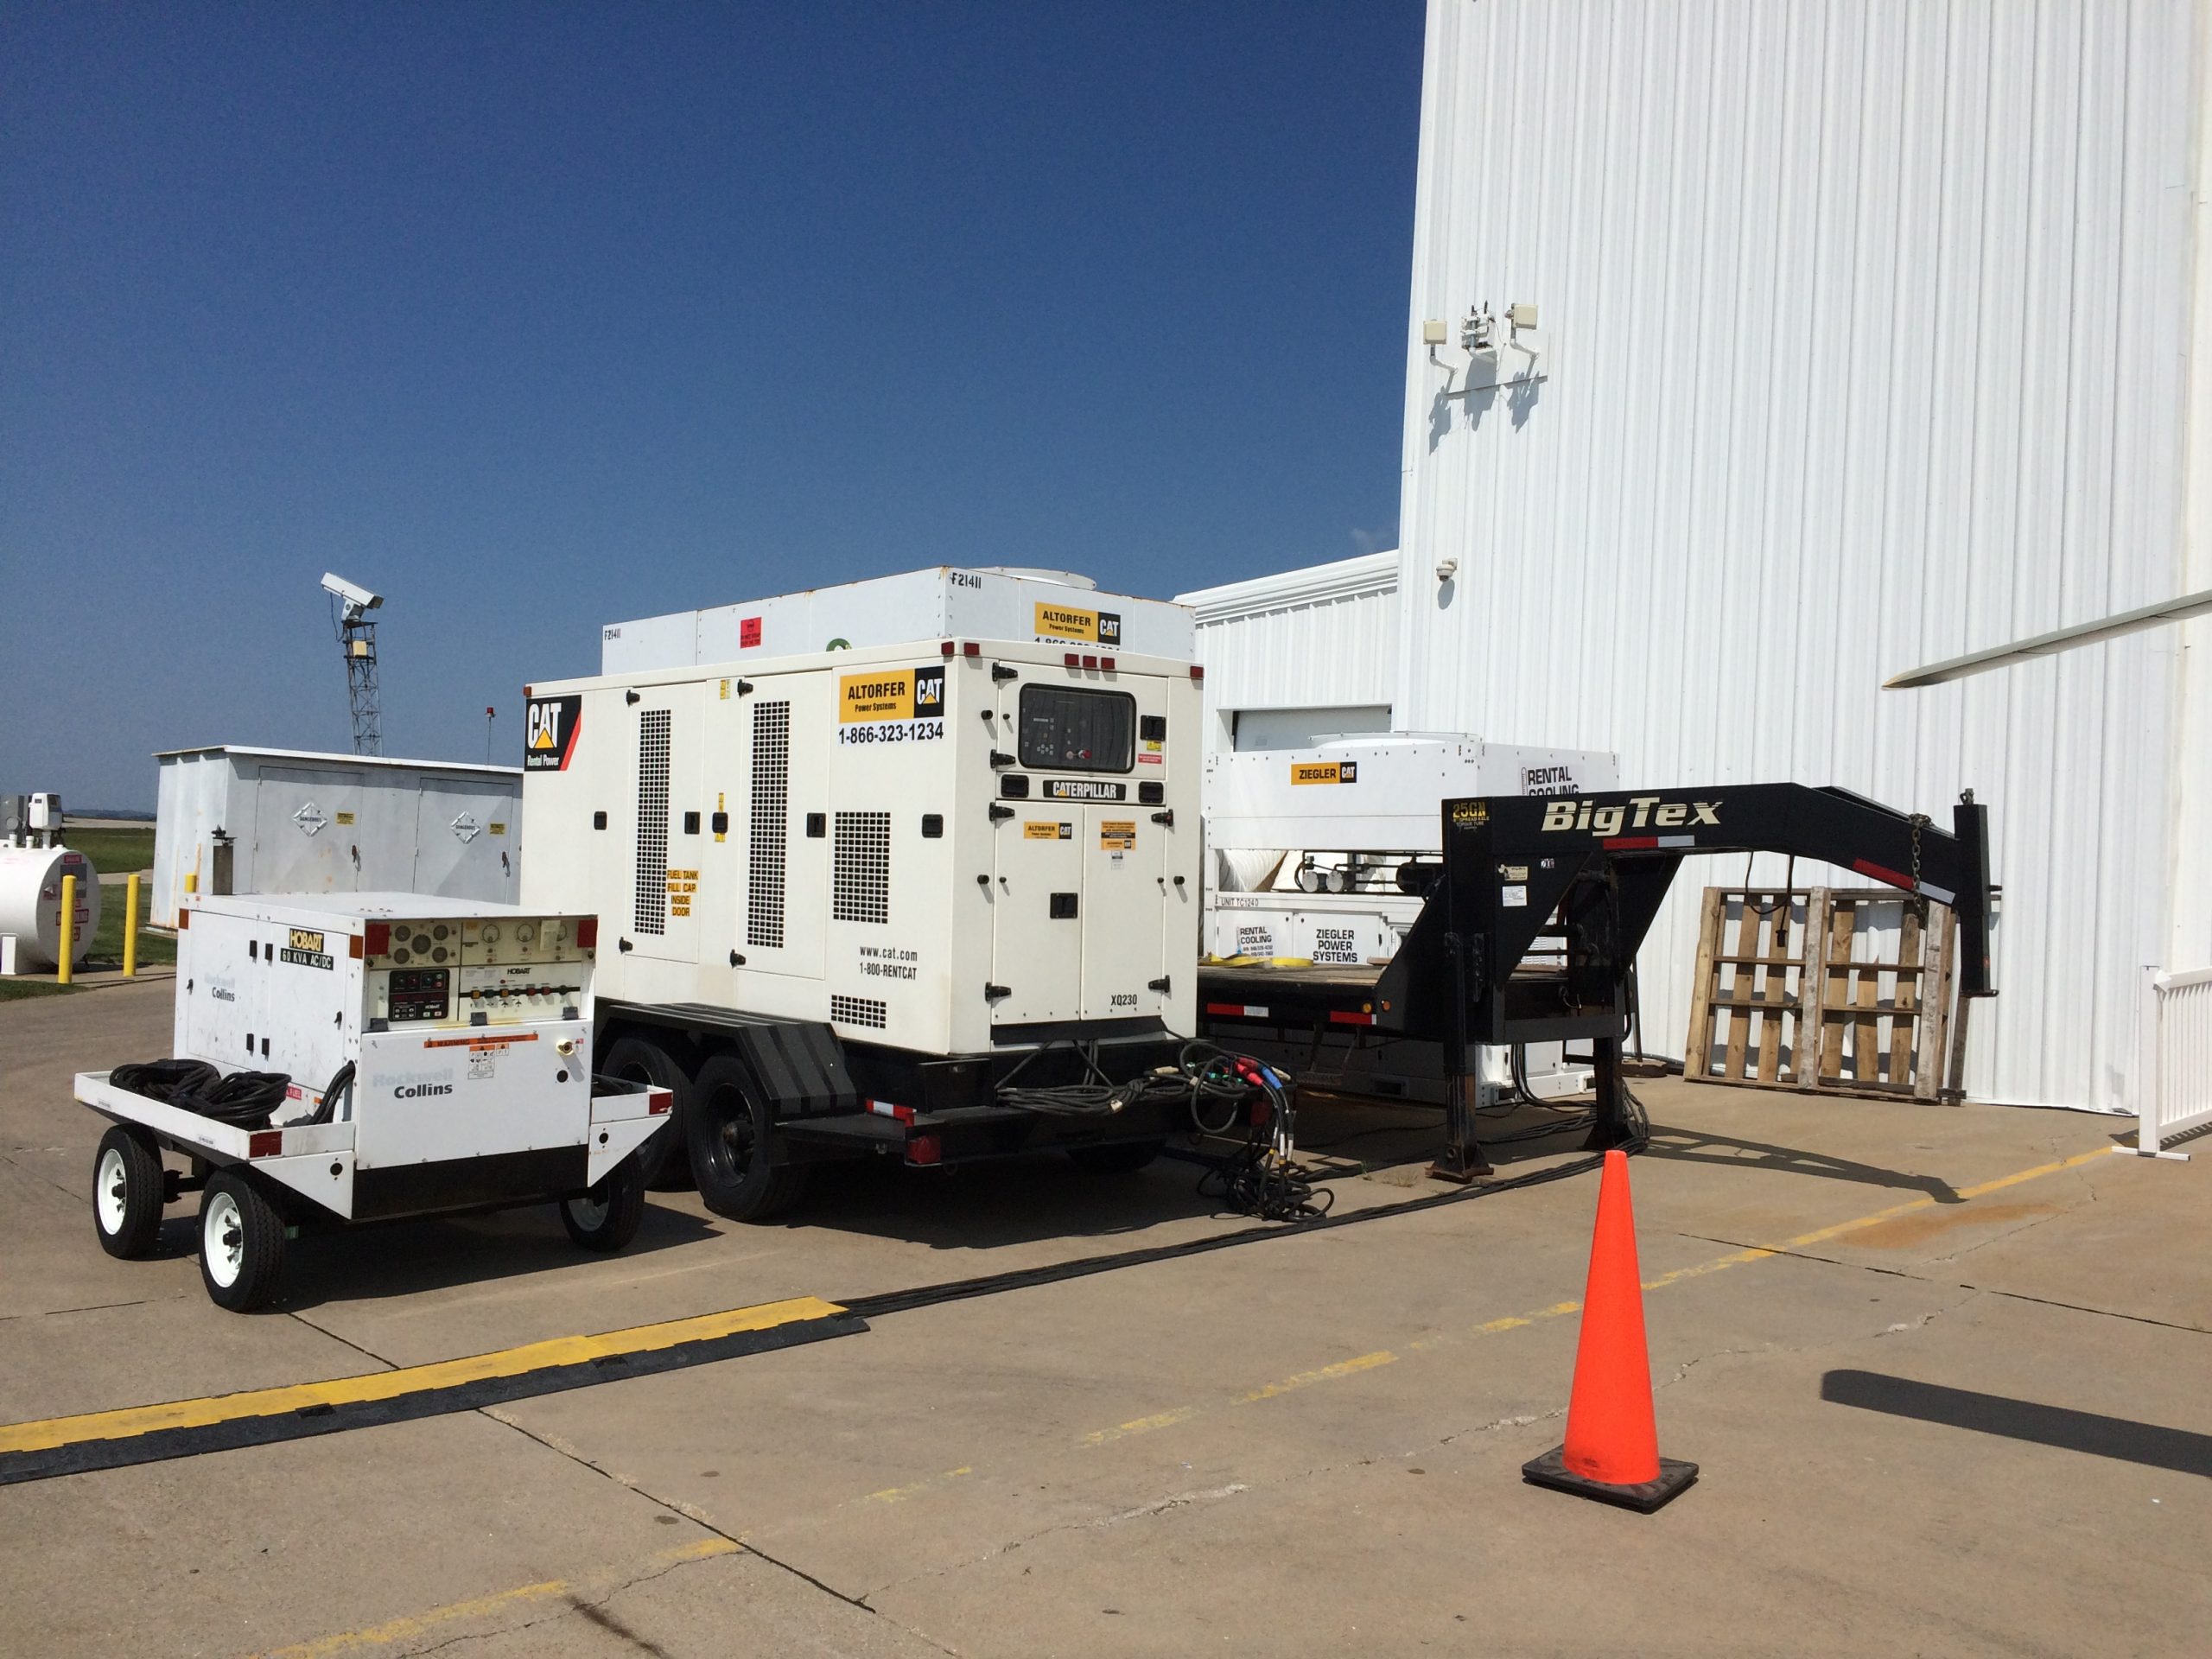 Generators and Air Conditioning units outside of airplane hangar